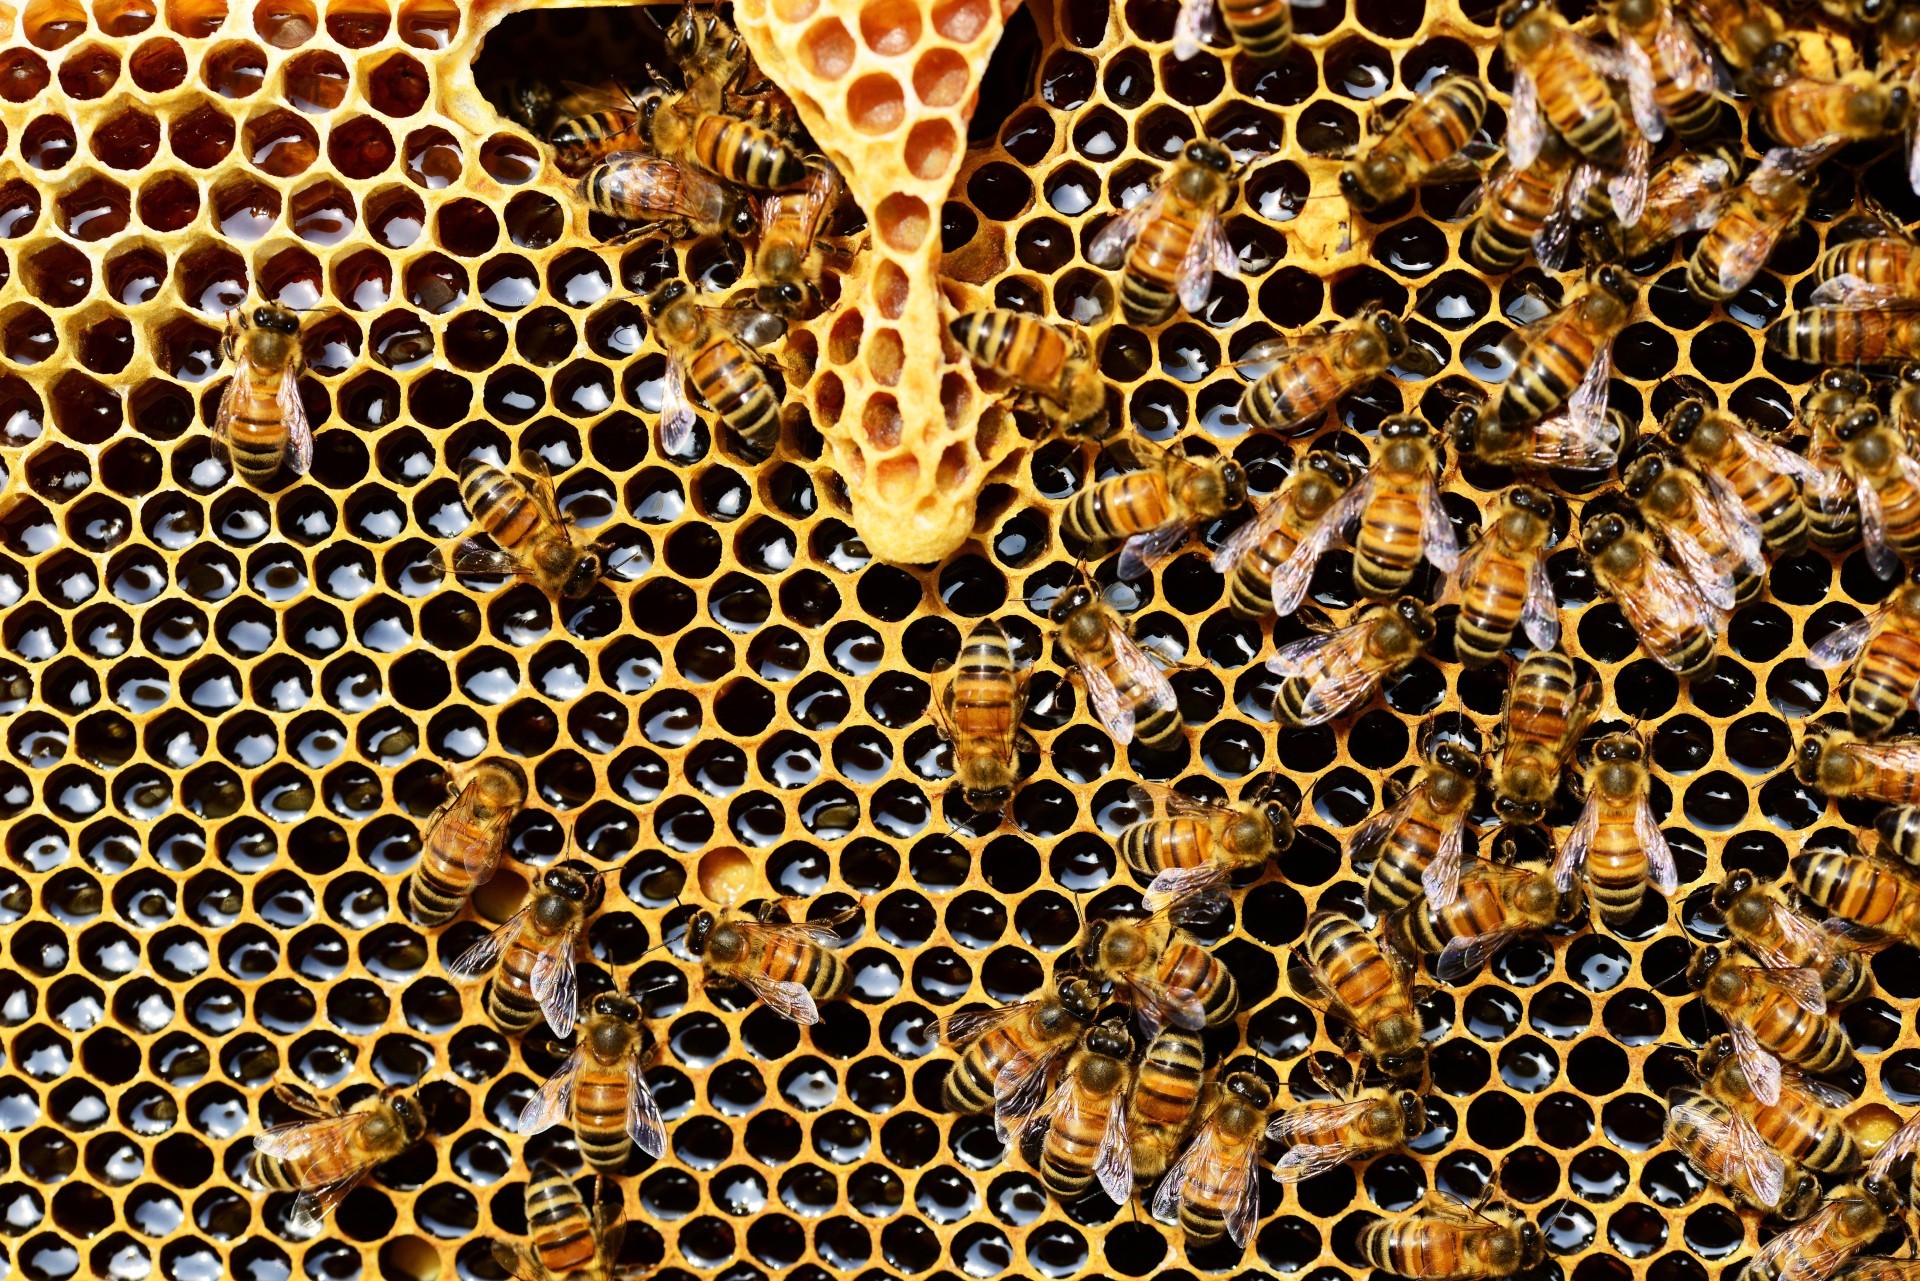 Bees making honey in a hive